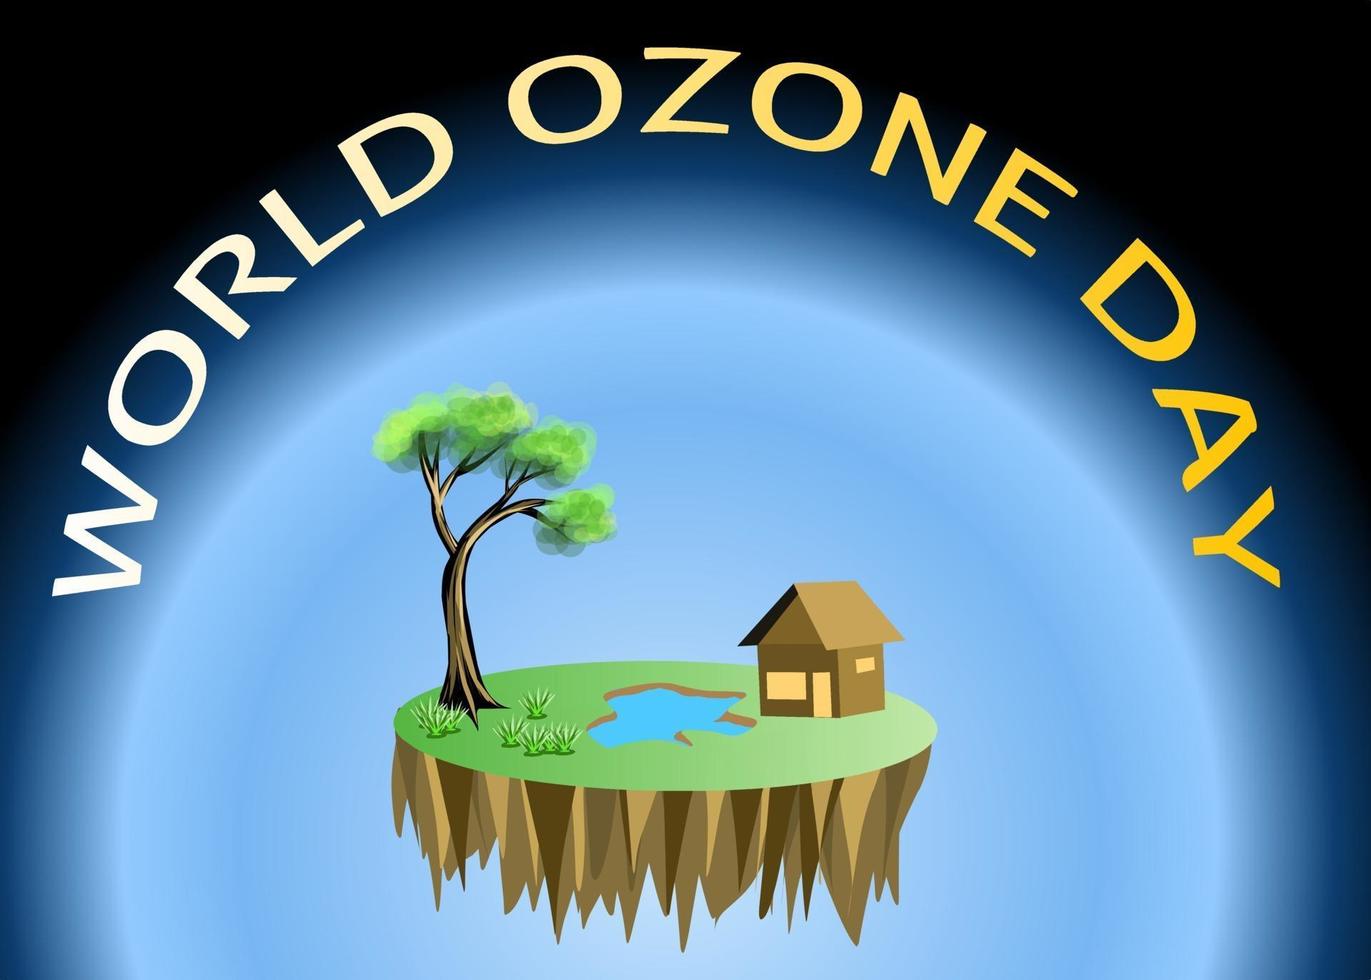 world ozone day greeting banner or poster vector